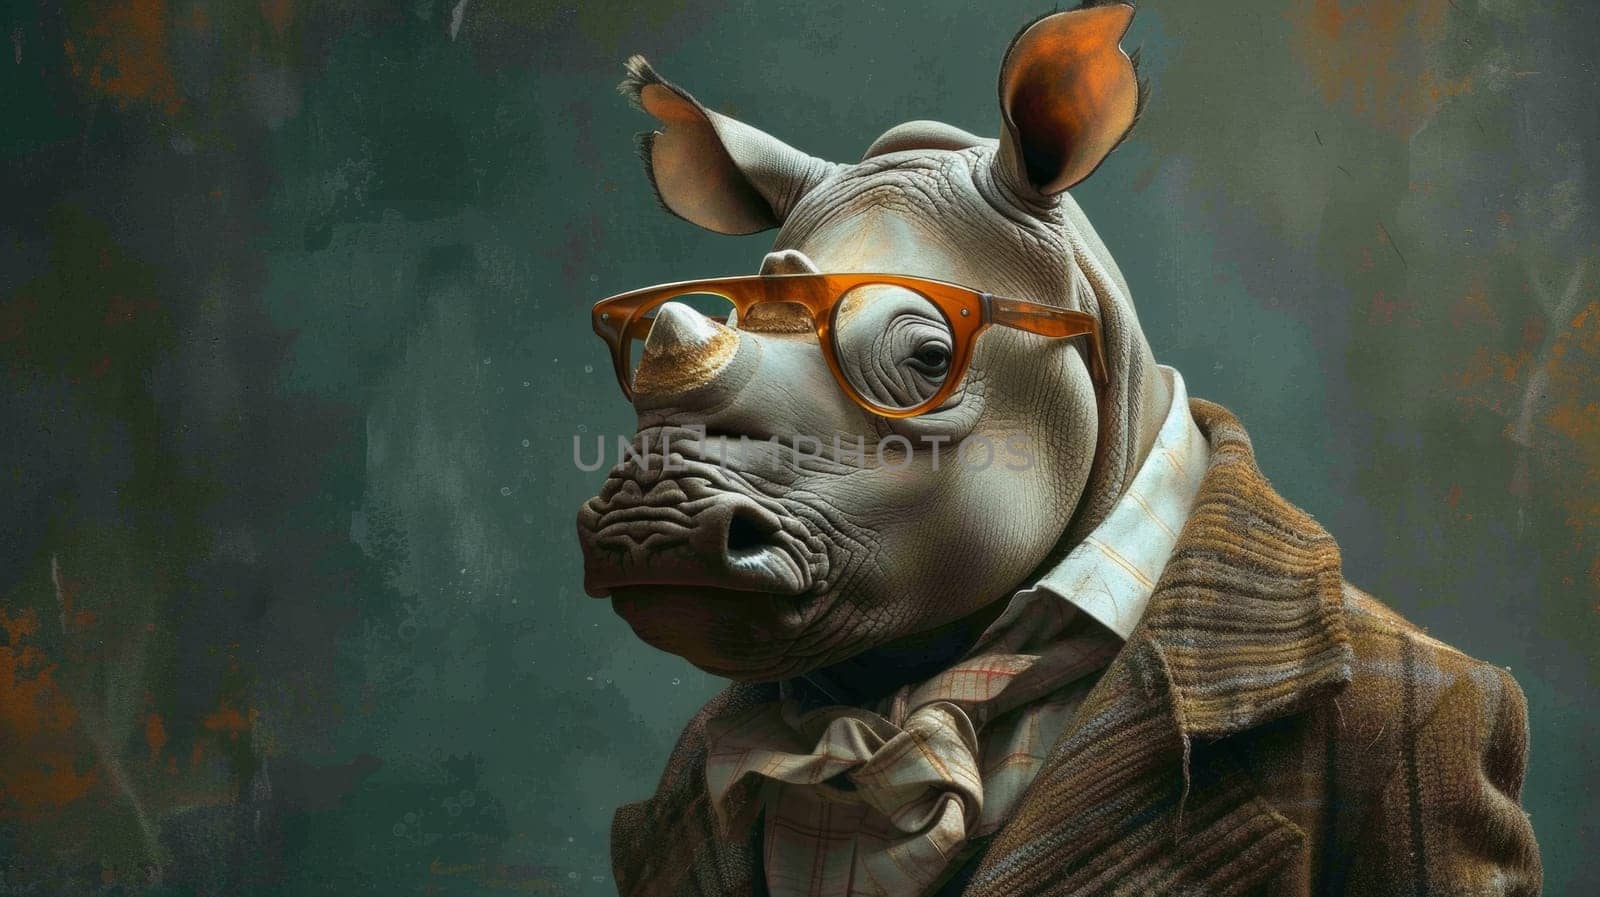 A rhino wearing a suit and glasses with an afro